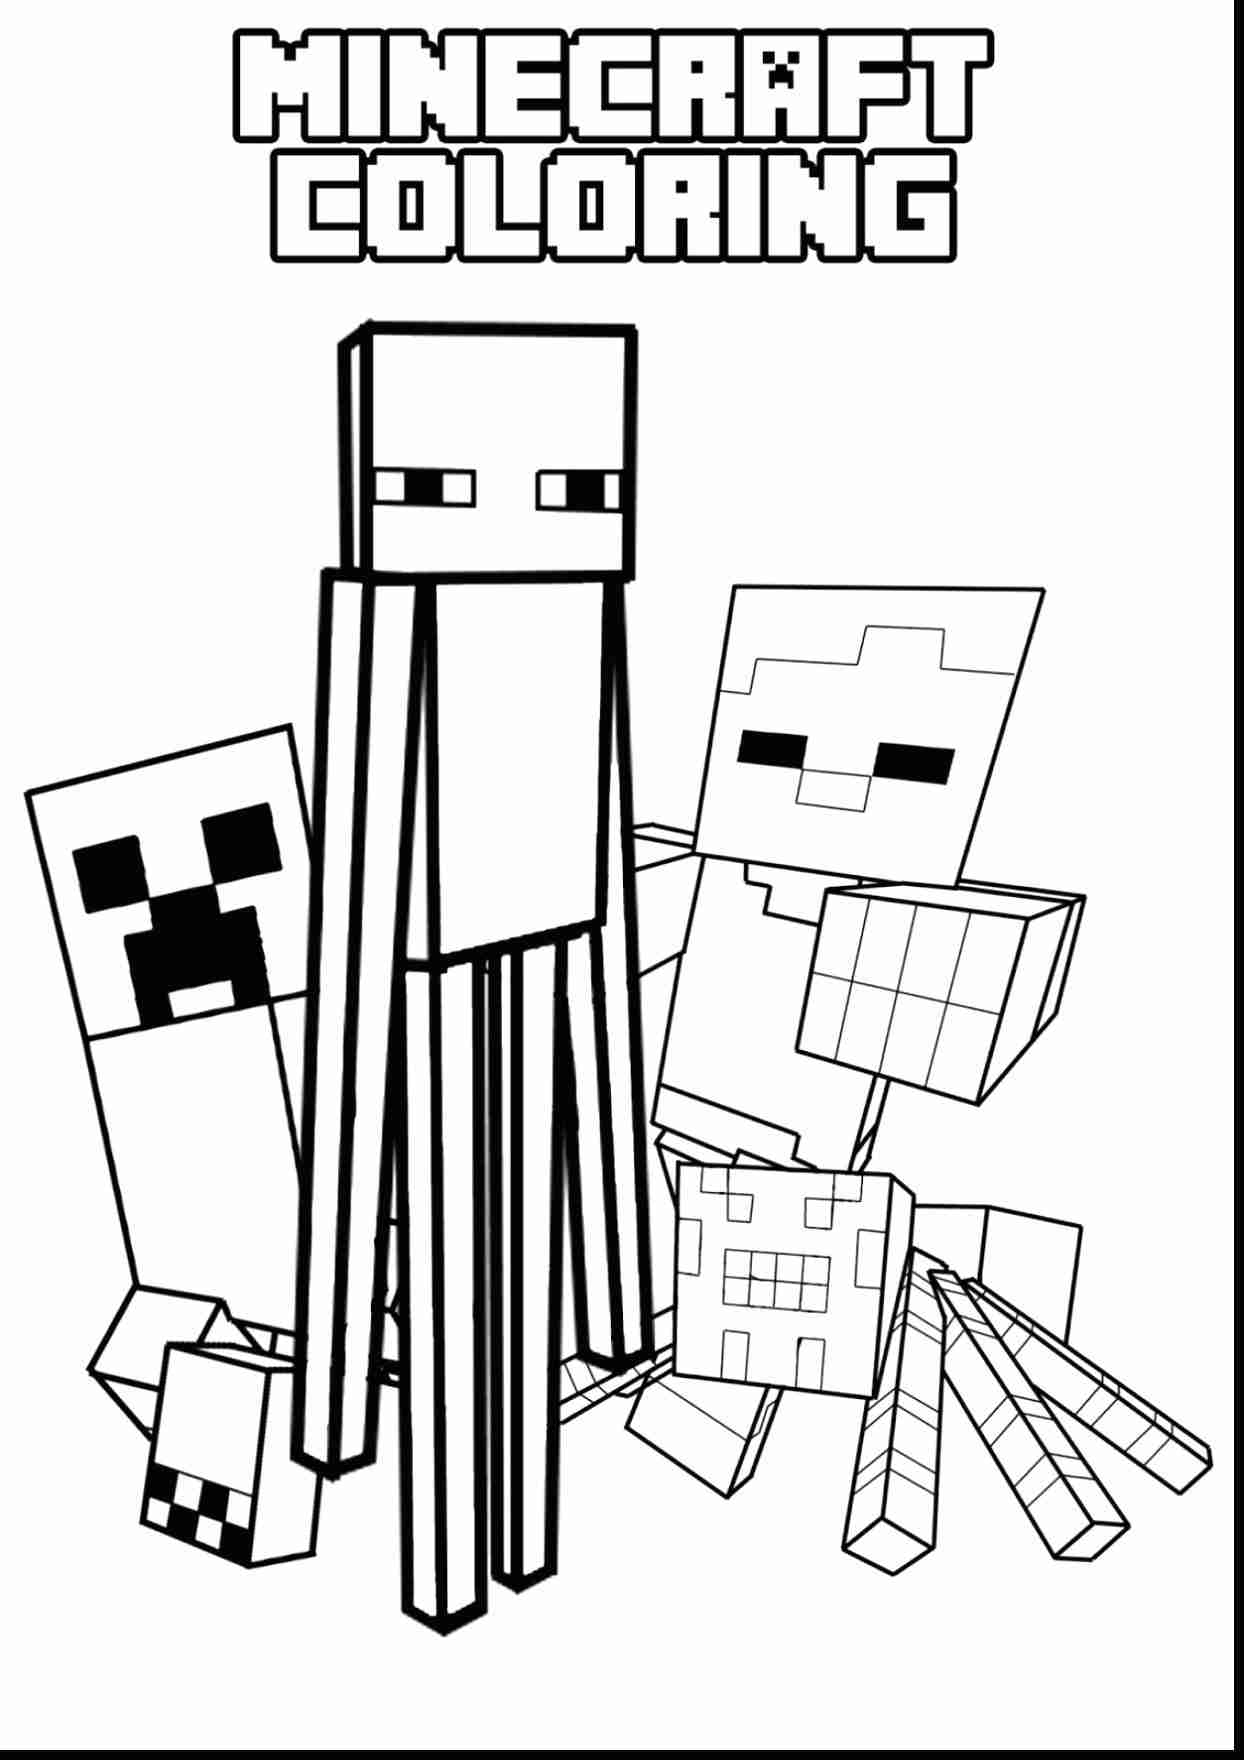 So, if you were looking for free minecraft creeper coloring page coloring s...